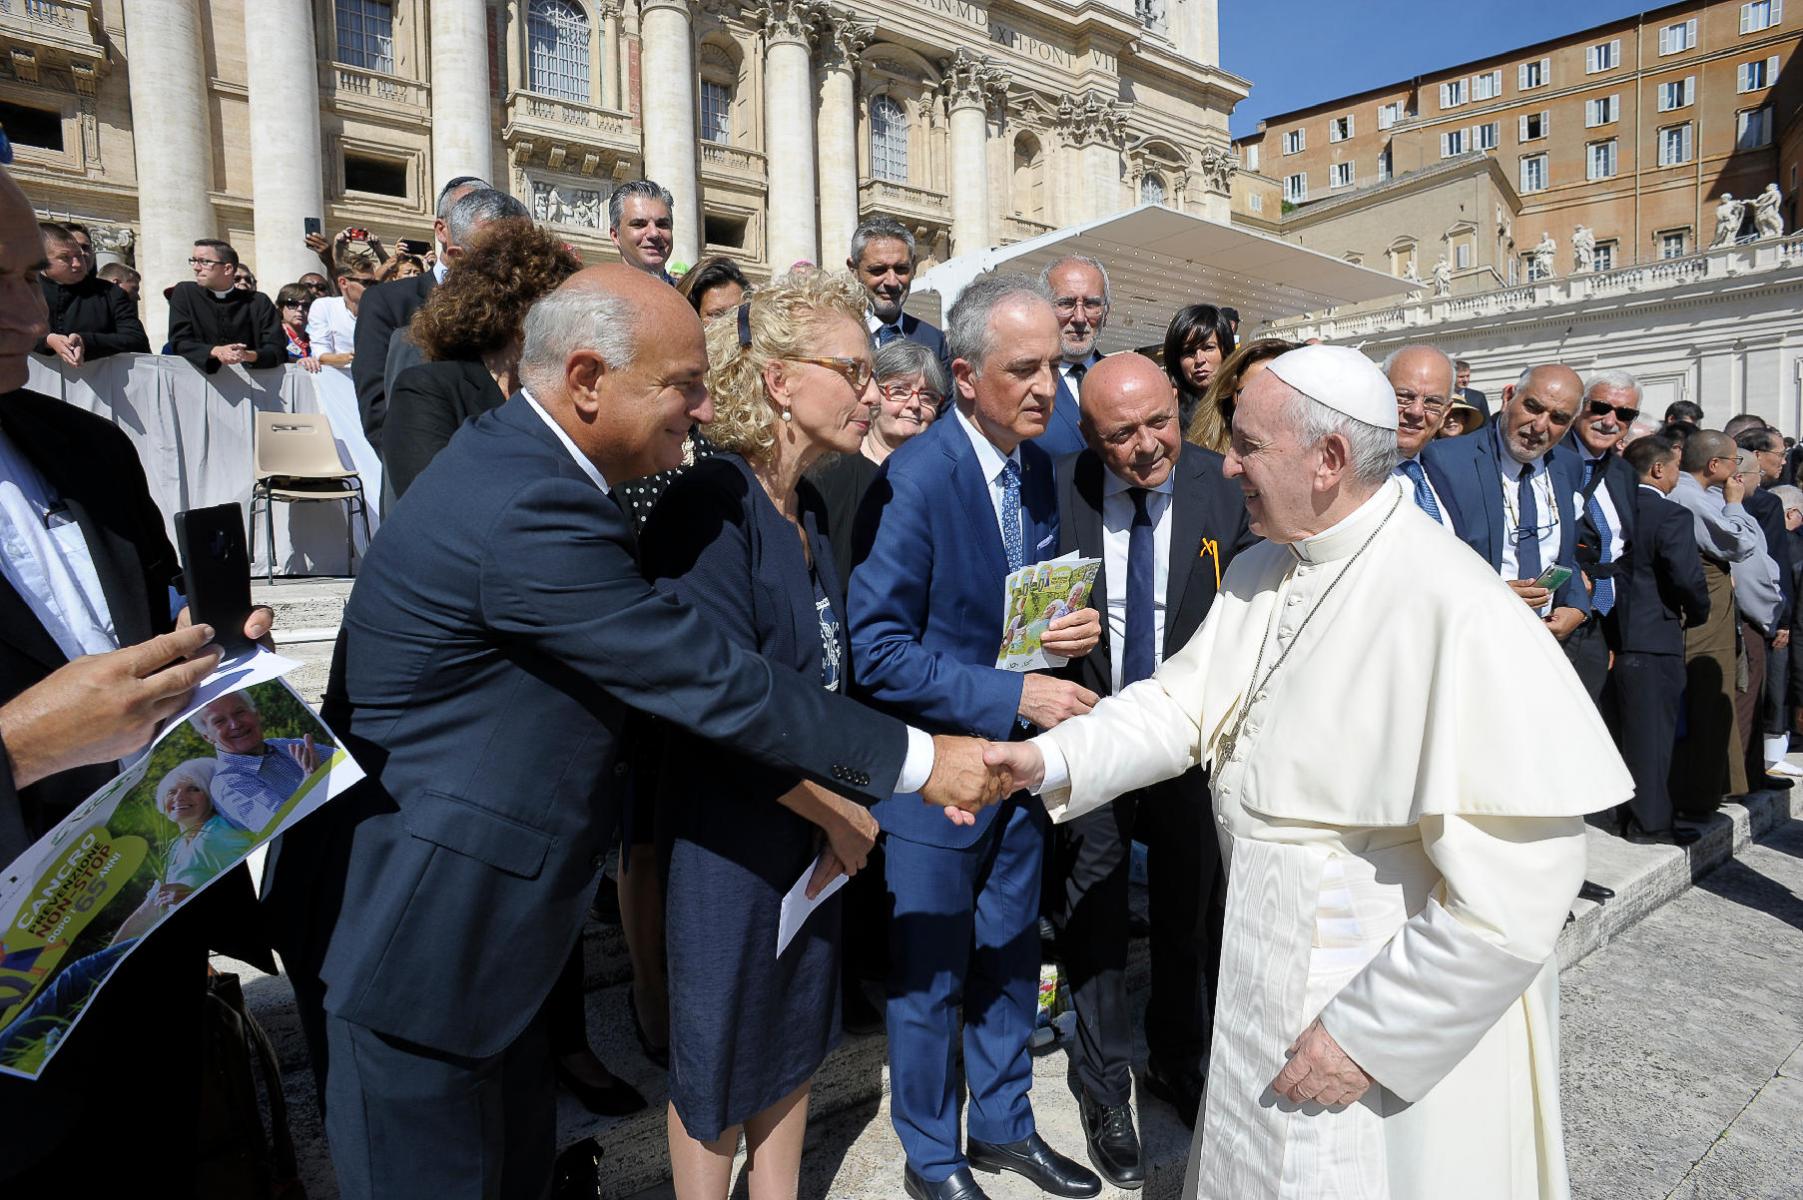 AIOM representatives meeting Pope Francis outside the Vatican